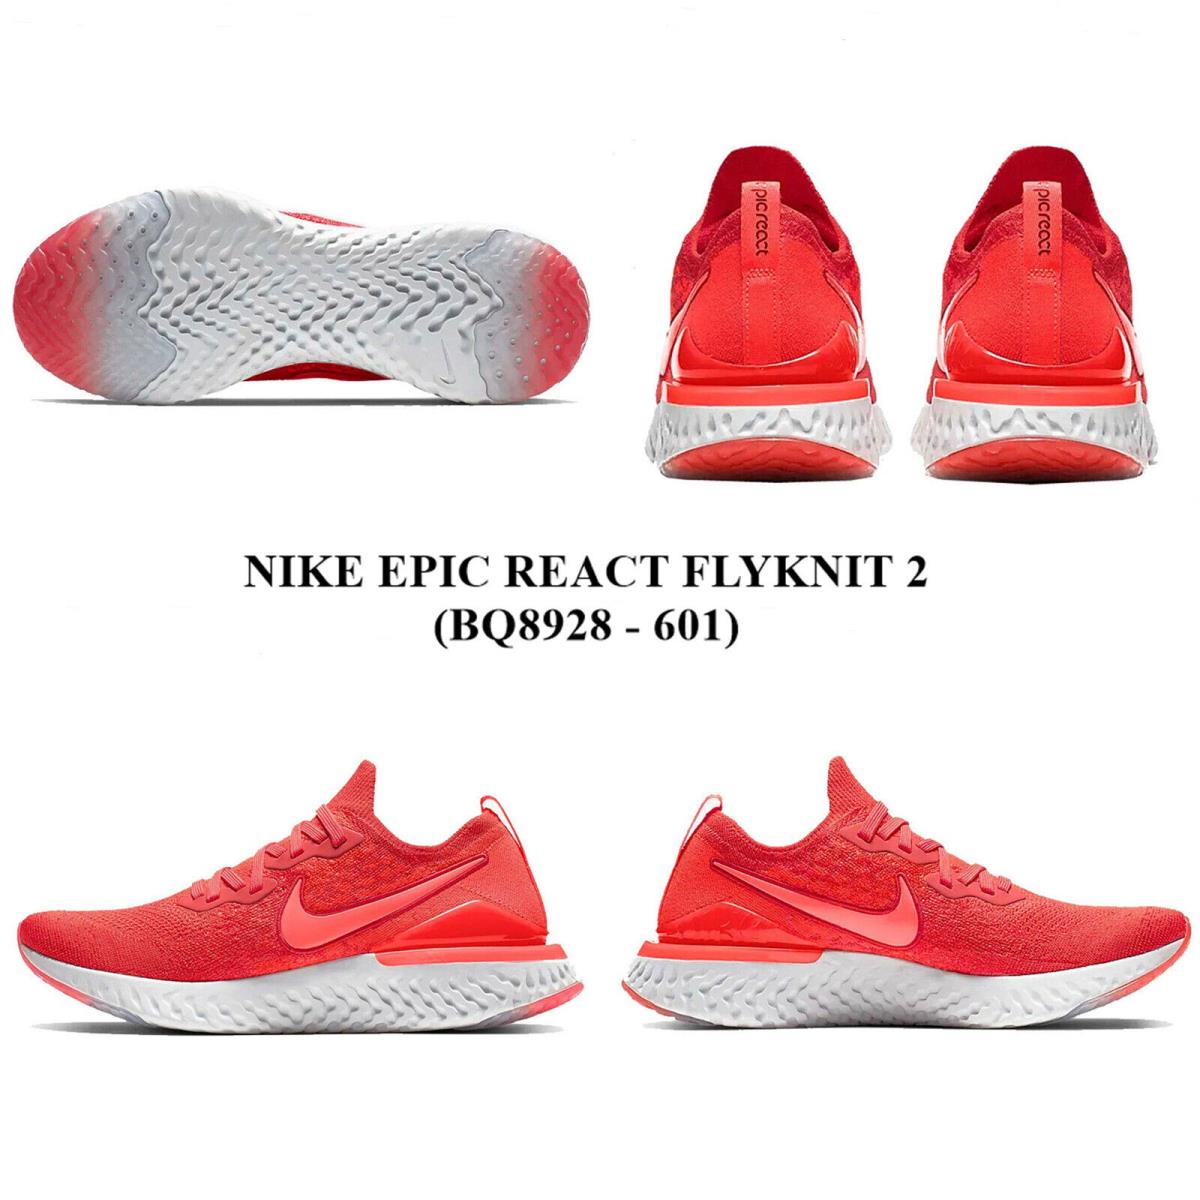 Nike Epic React Flyknit 2 BQ8928 - 601 Men`s Running Shoes. NO Lid - CHILI RED / BRIGHT CRIMSON , CHILI RED / BRIGHT CRIMSON Manufacturer